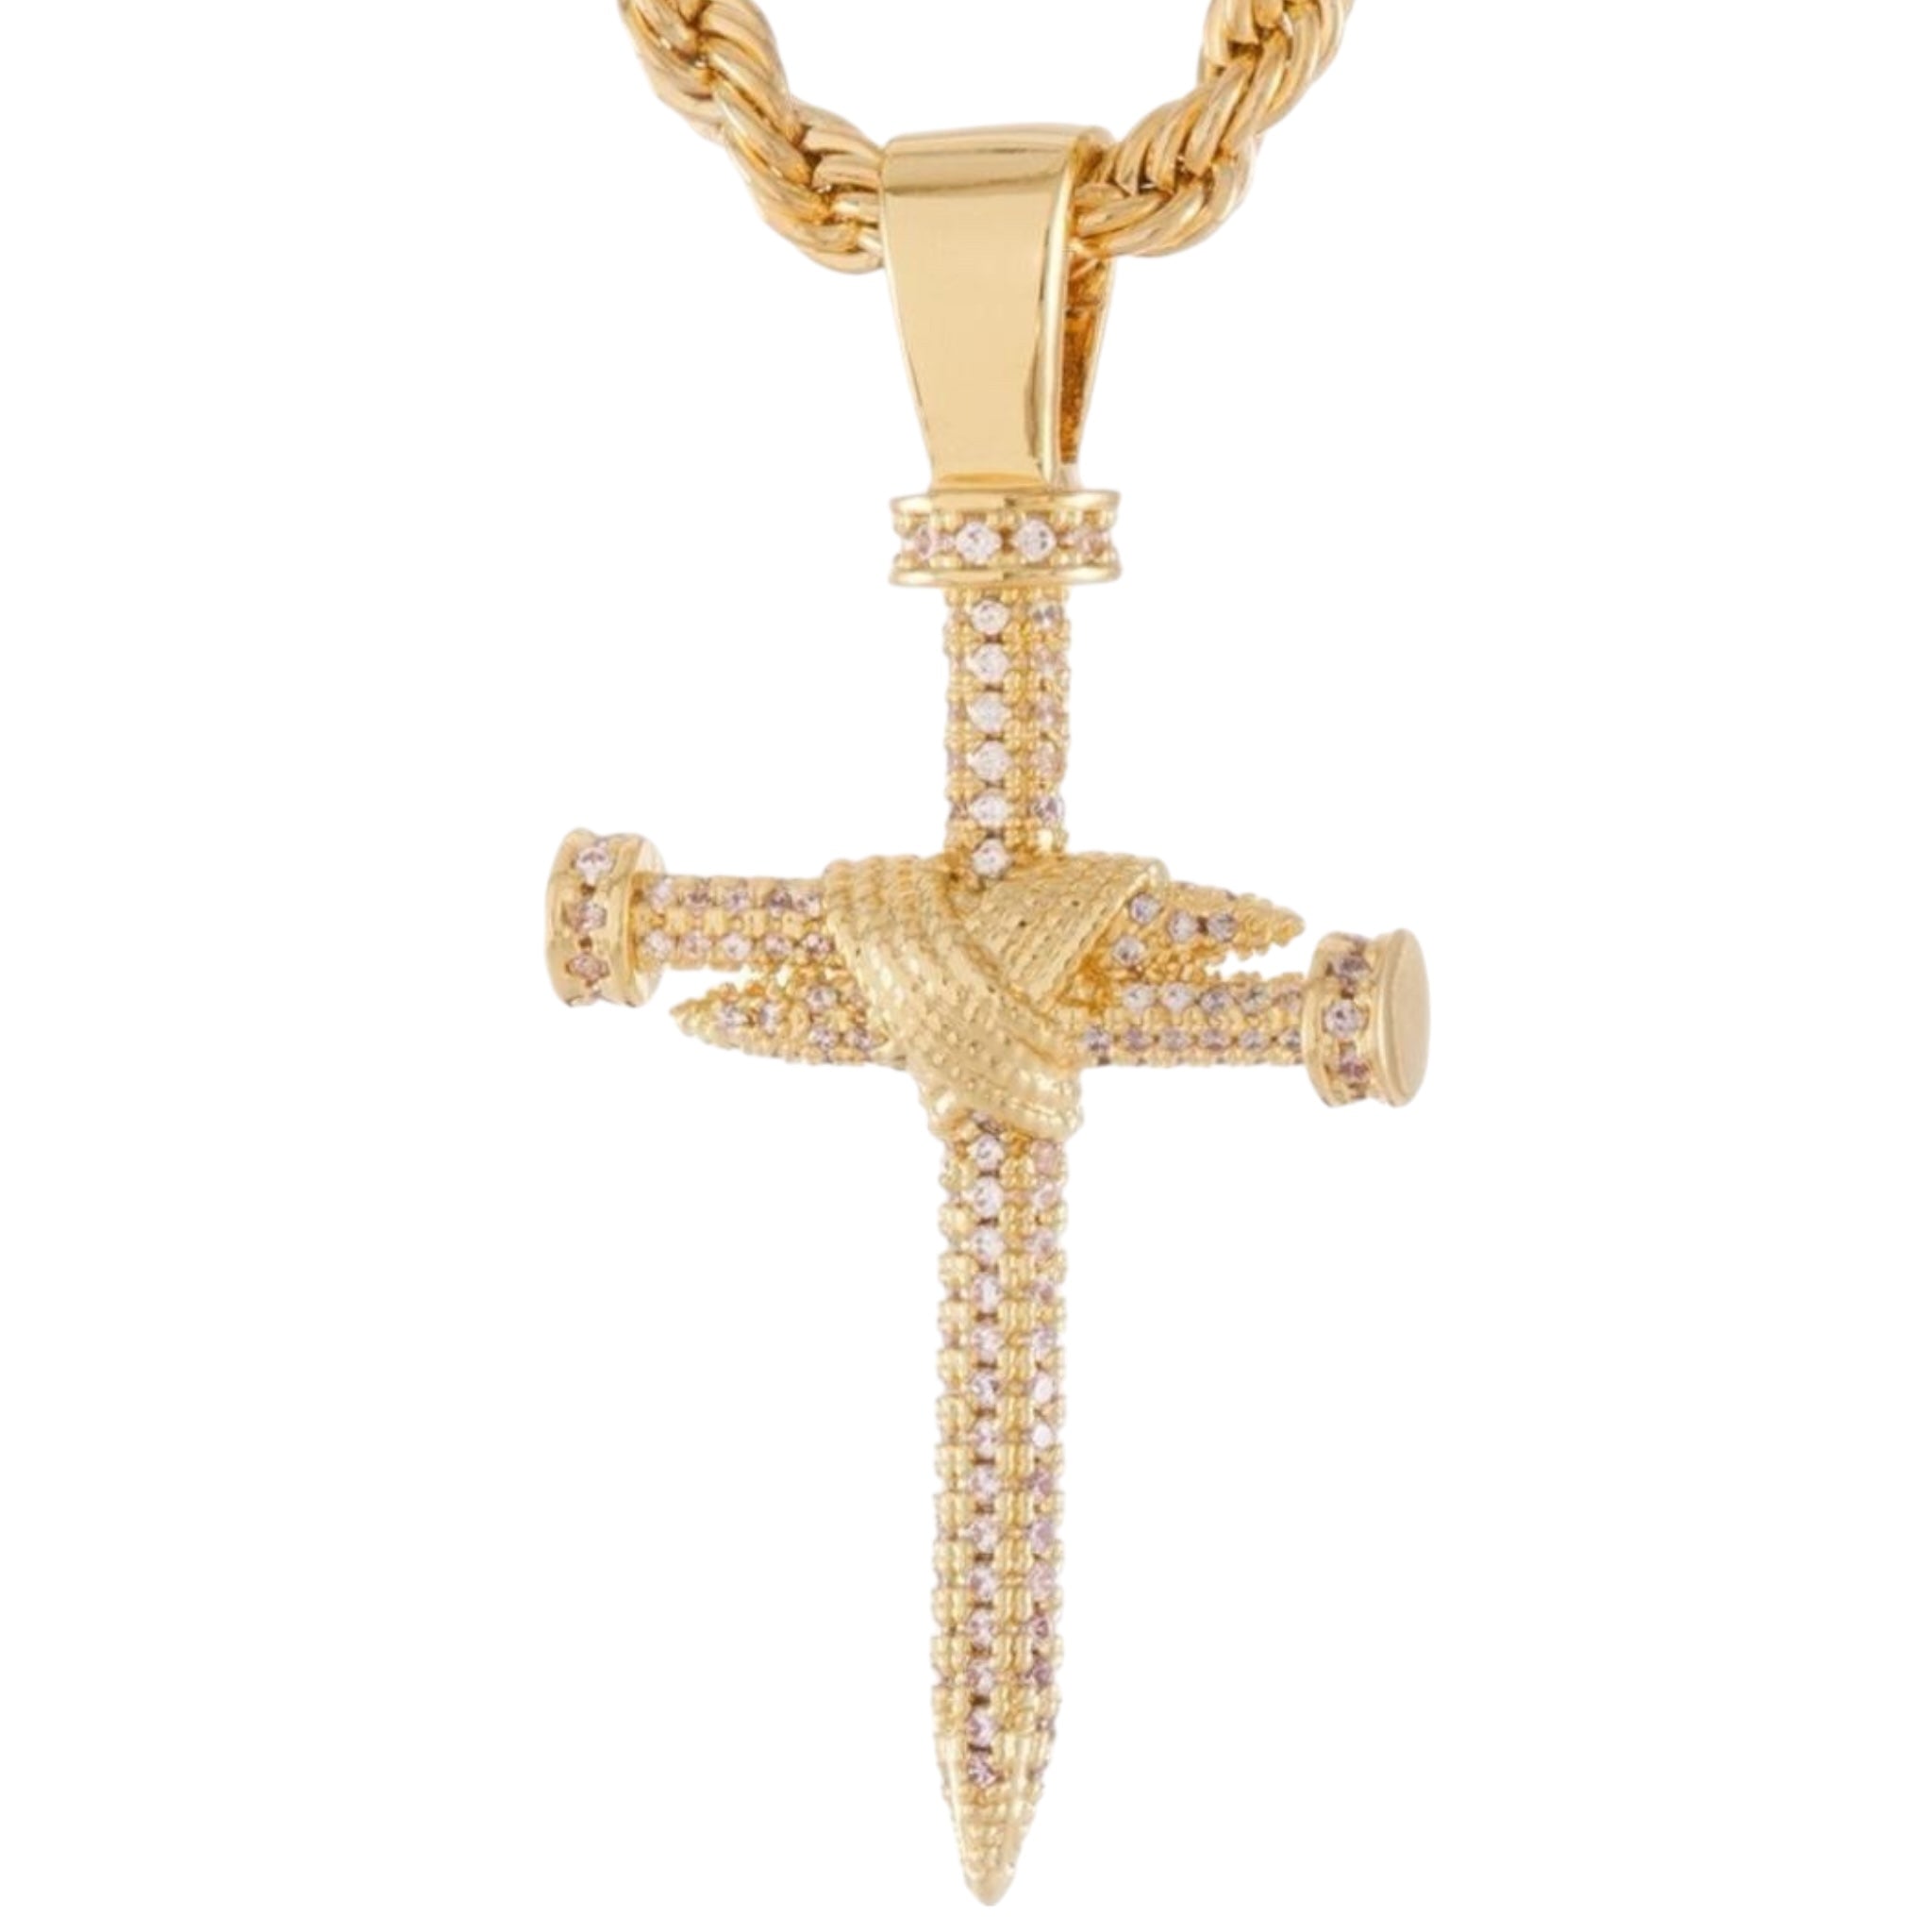 KING ICE: 2" Nail Cross Necklace